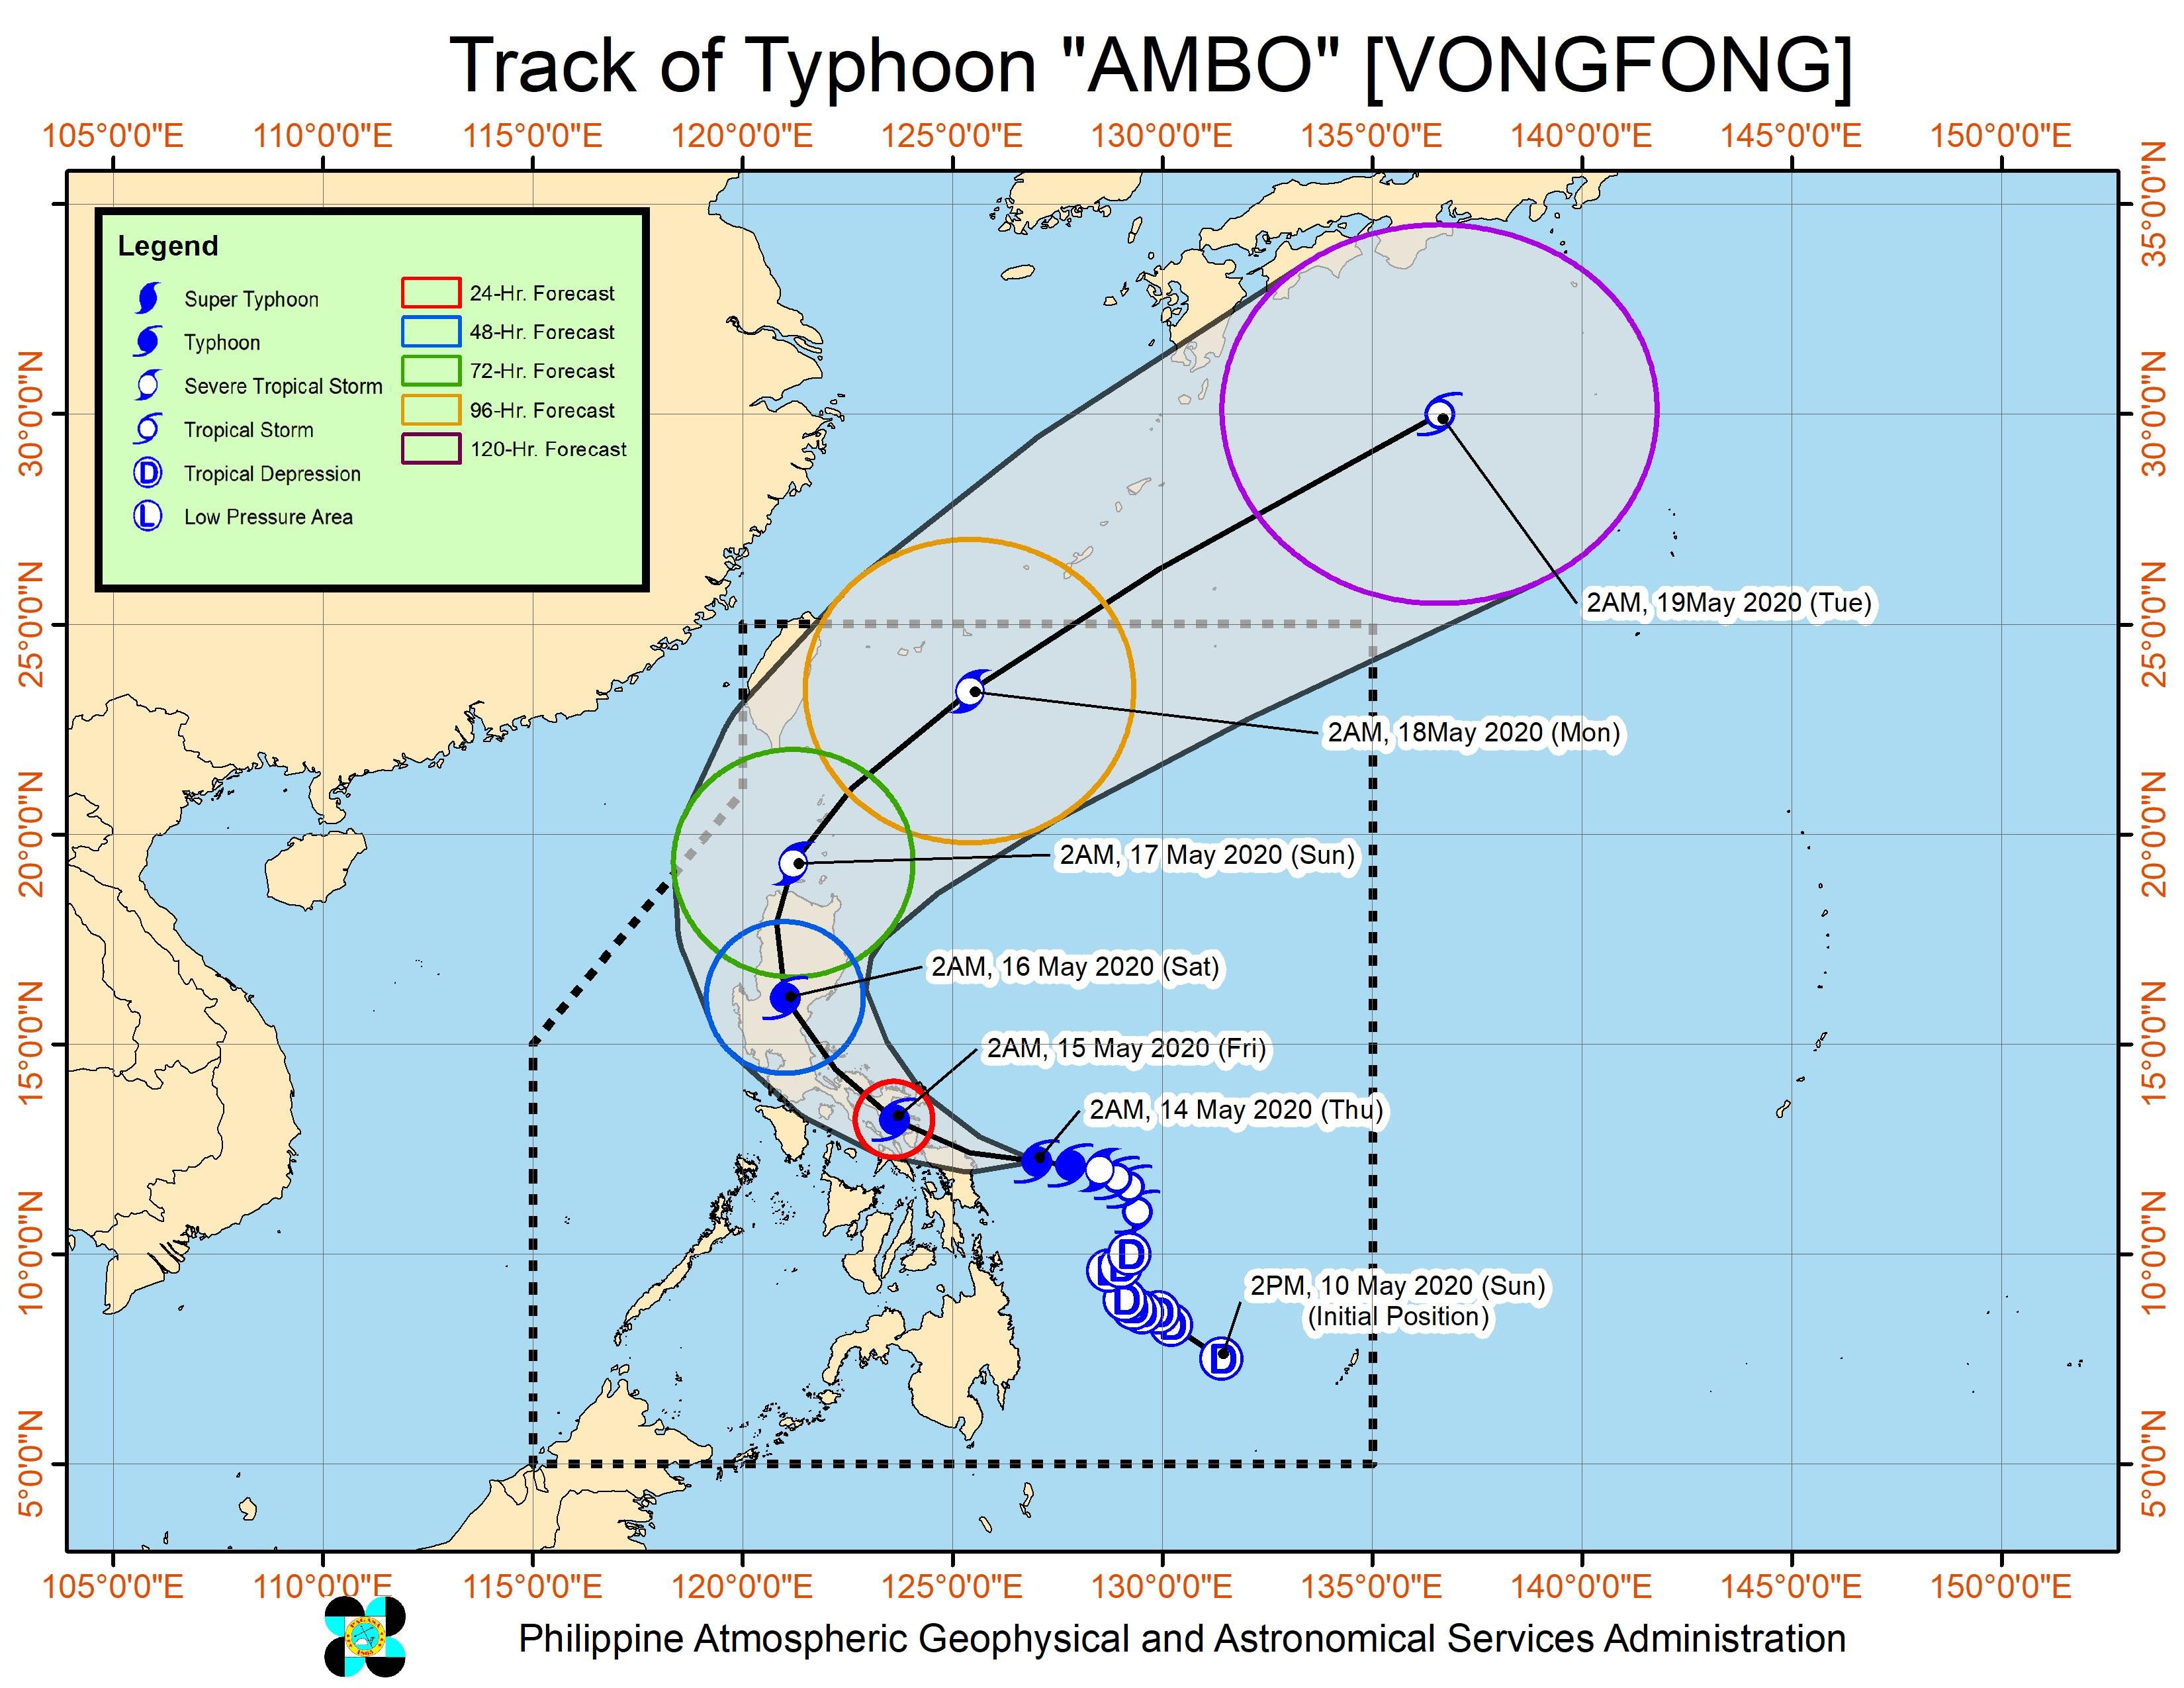 Forecast track of Typhoon Ambo (Vongfong) as of May 14, 2020, 5 am. Image from PAGASA 